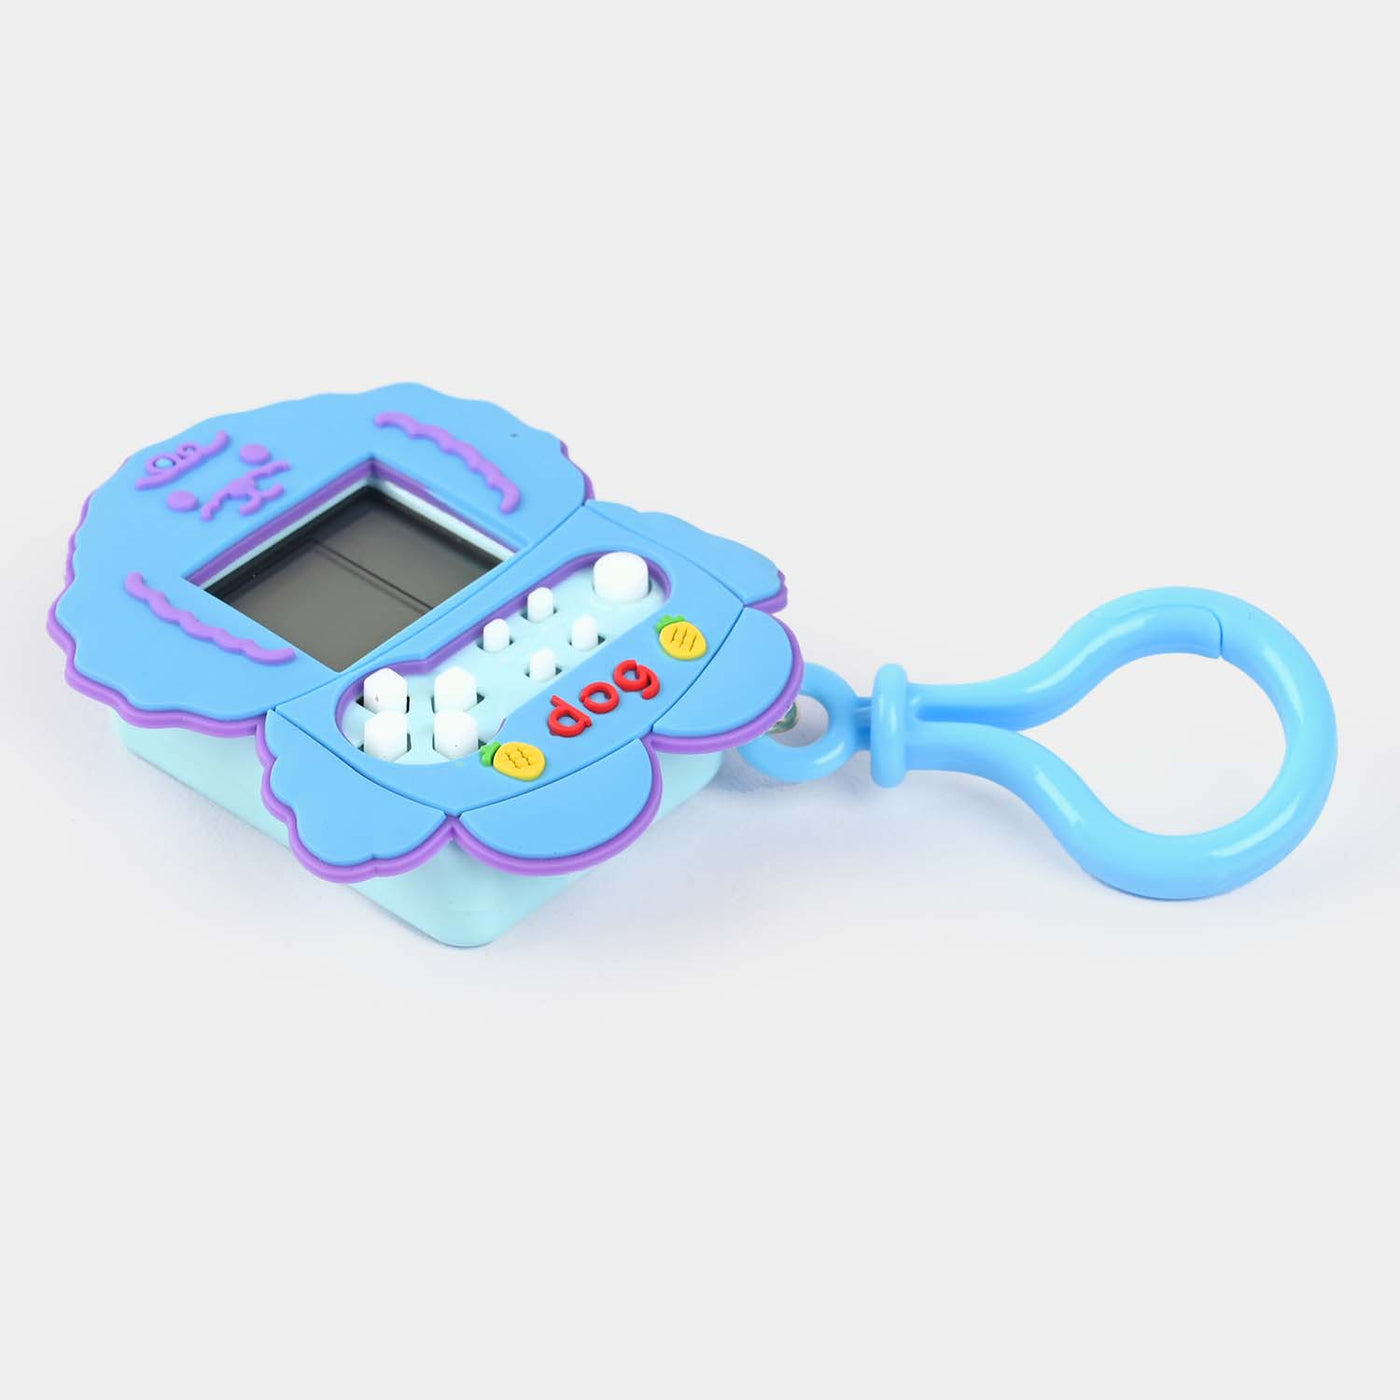 Mini Golden Keychain With A To Z Multi Game